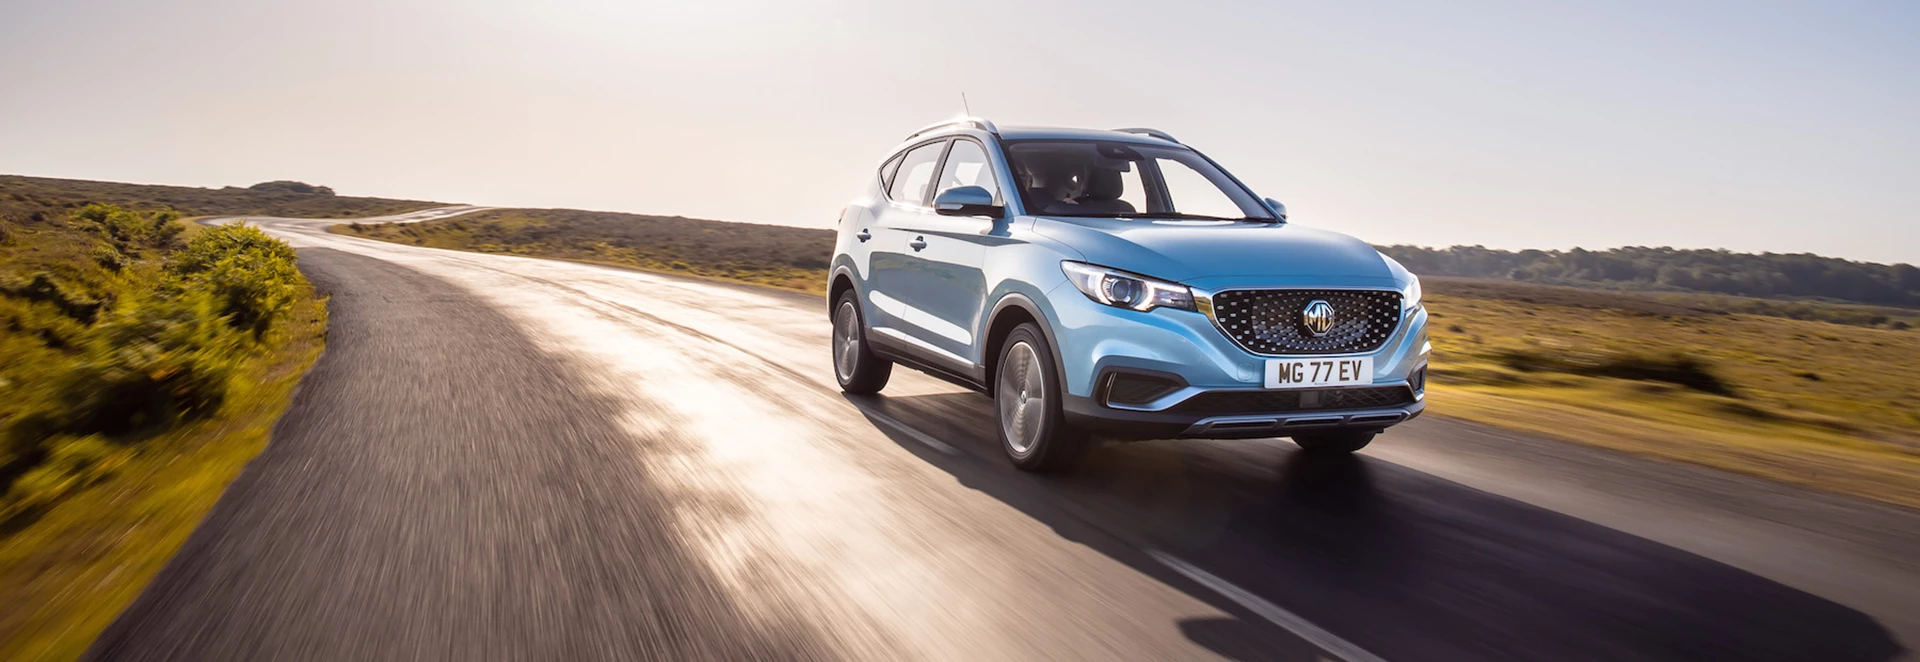 Pricing for new MG ZS EV announced